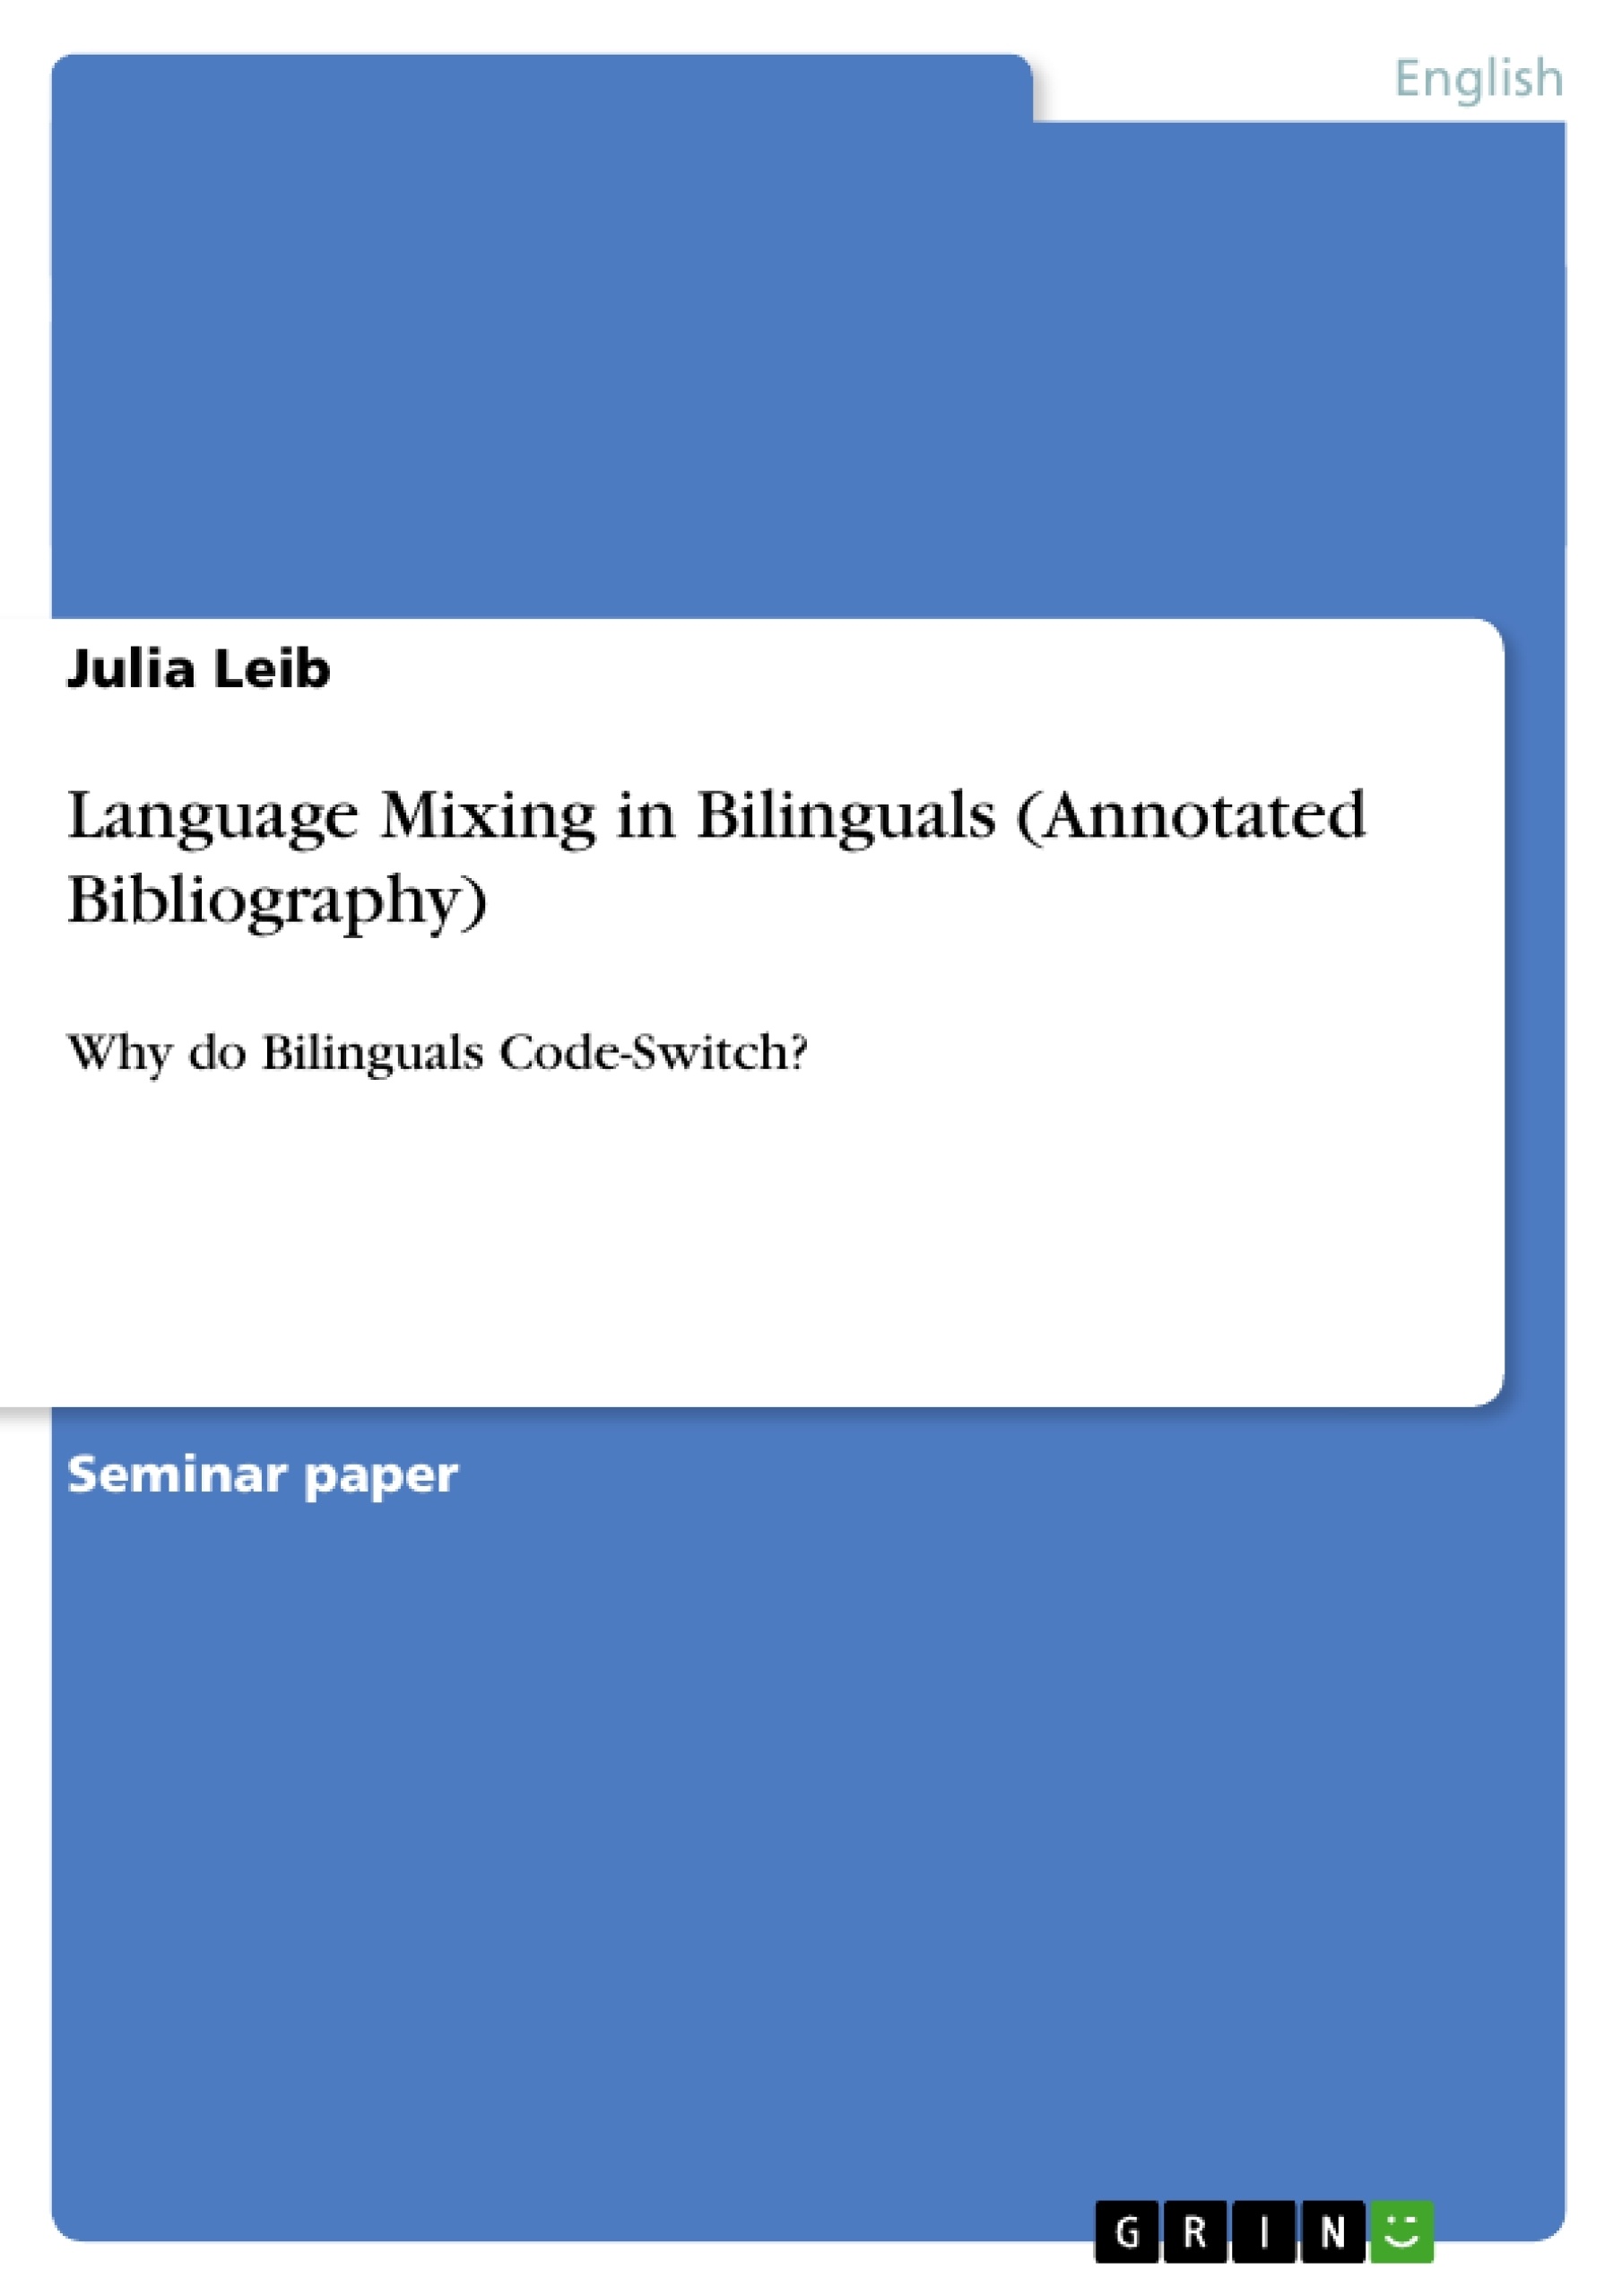 Title: Language Mixing in Bilinguals (Annotated Bibliography)